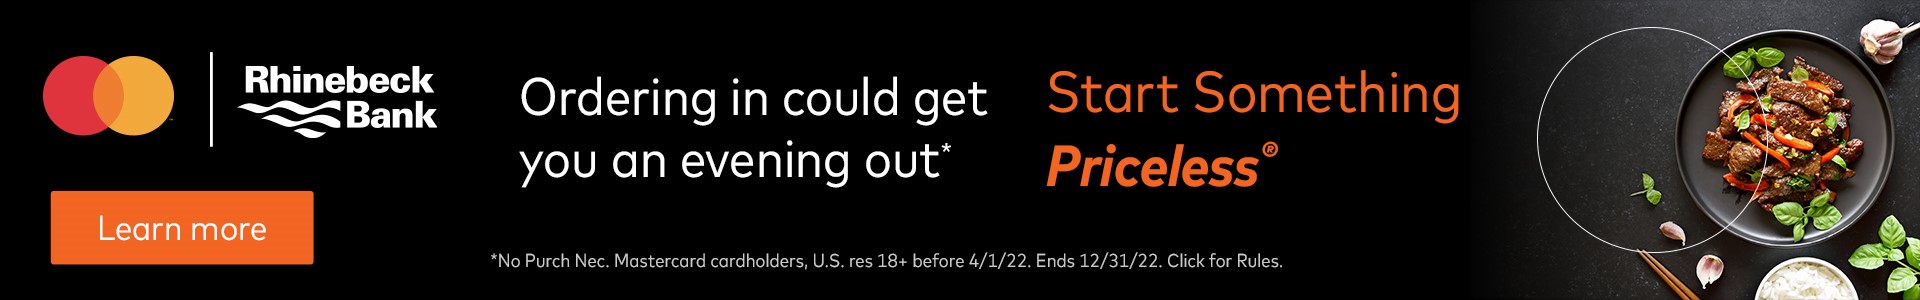 Mastercard Priceless Surprises - CI - homepage banner ad